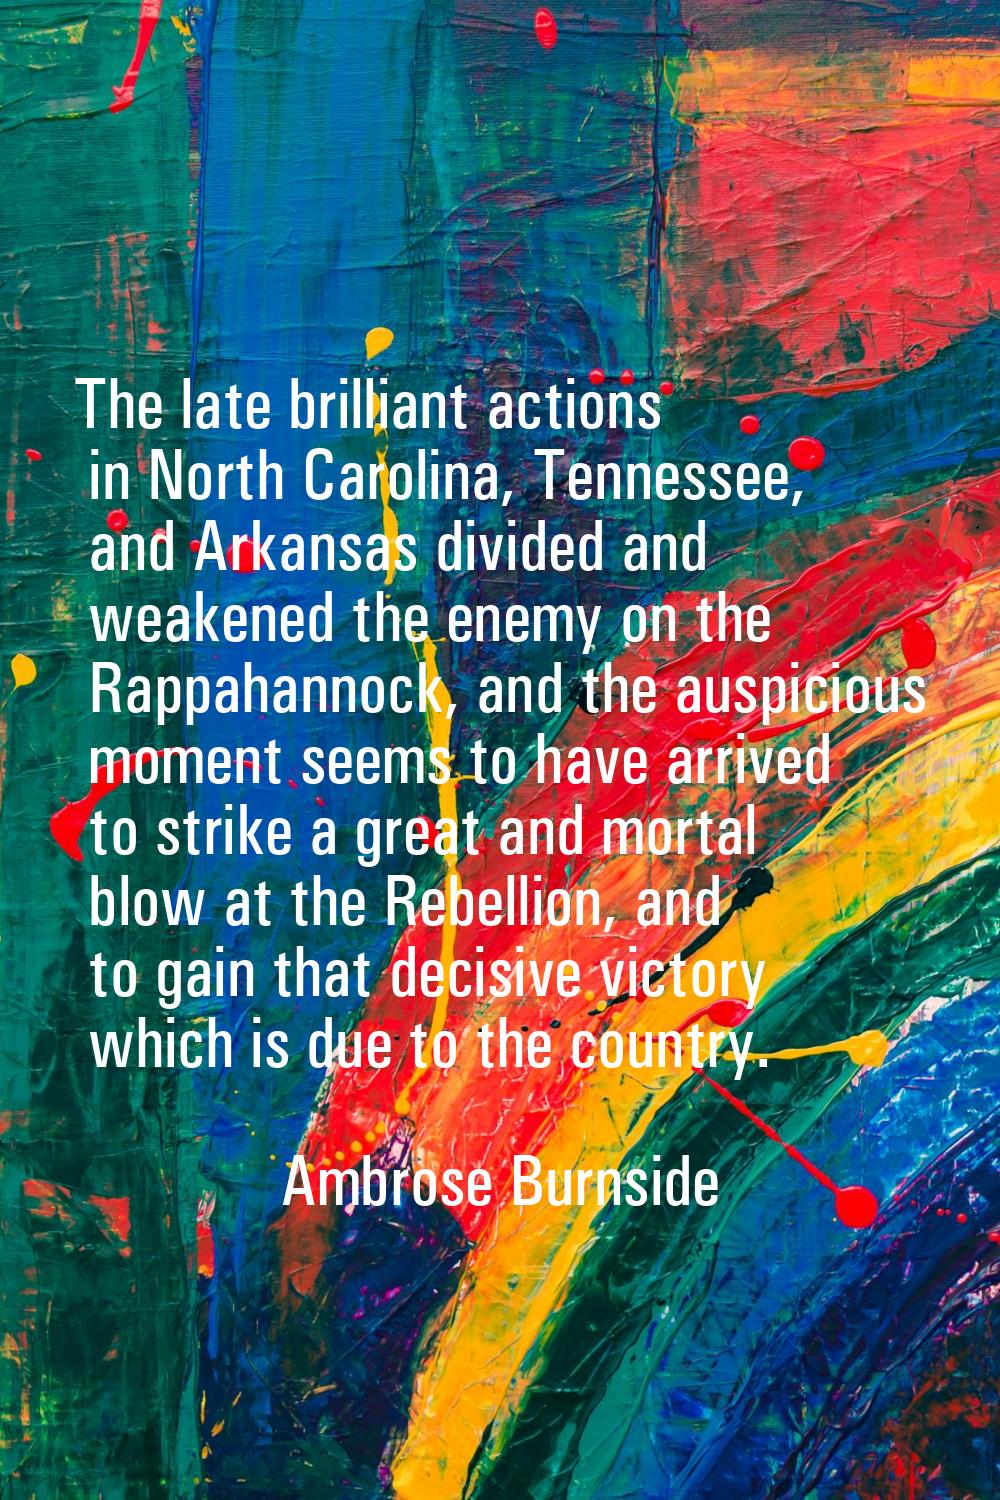 The late brilliant actions in North Carolina, Tennessee, and Arkansas divided and weakened the enem